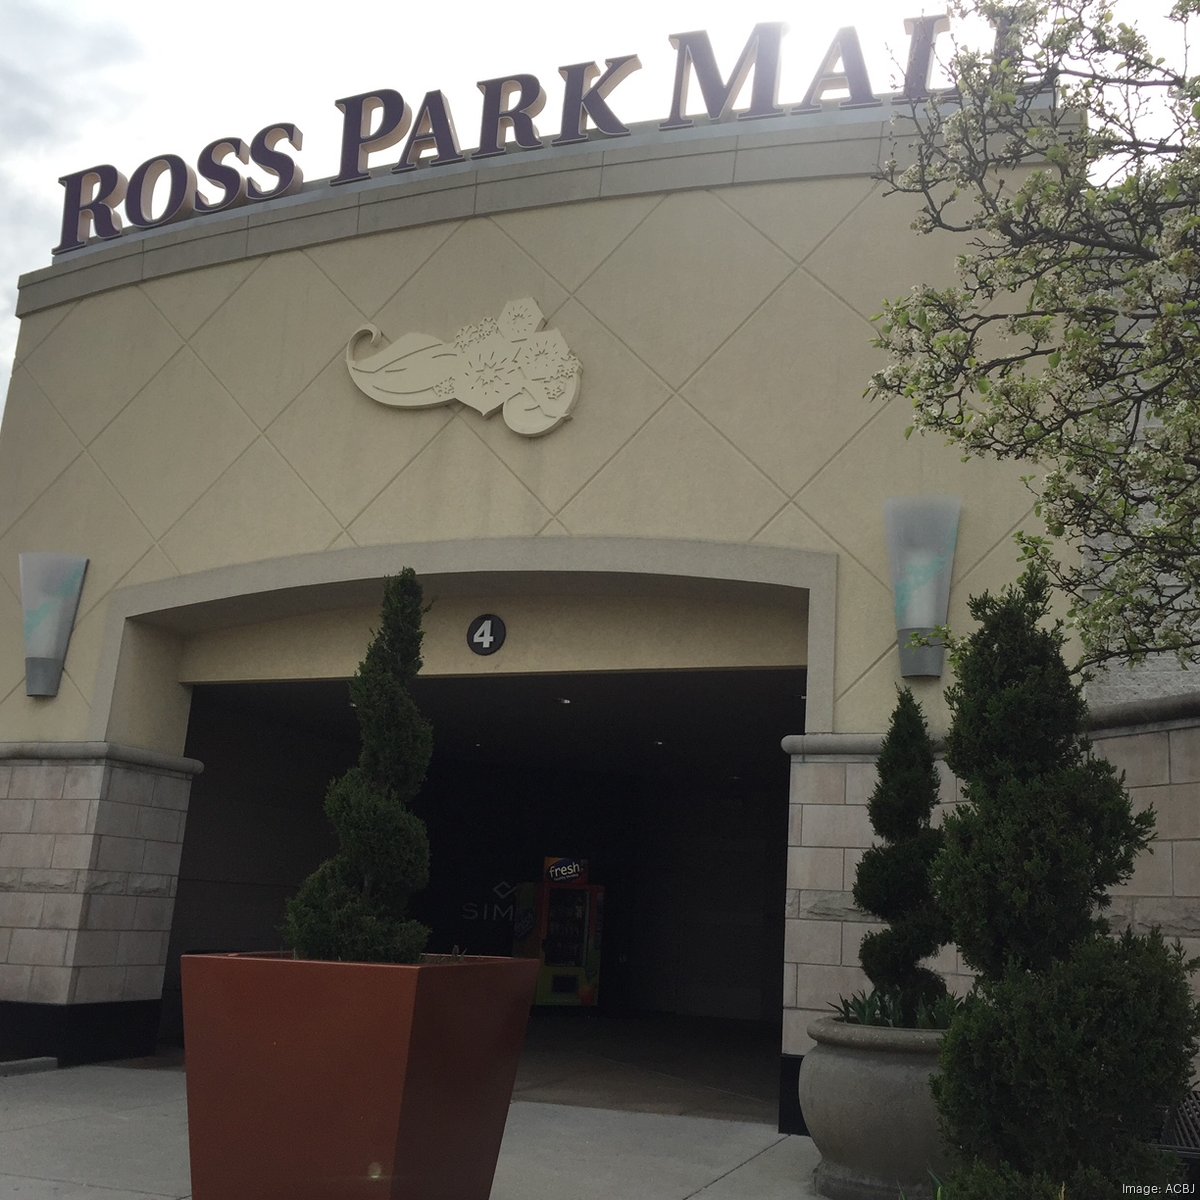 Windsor Store at Ross Park Mall